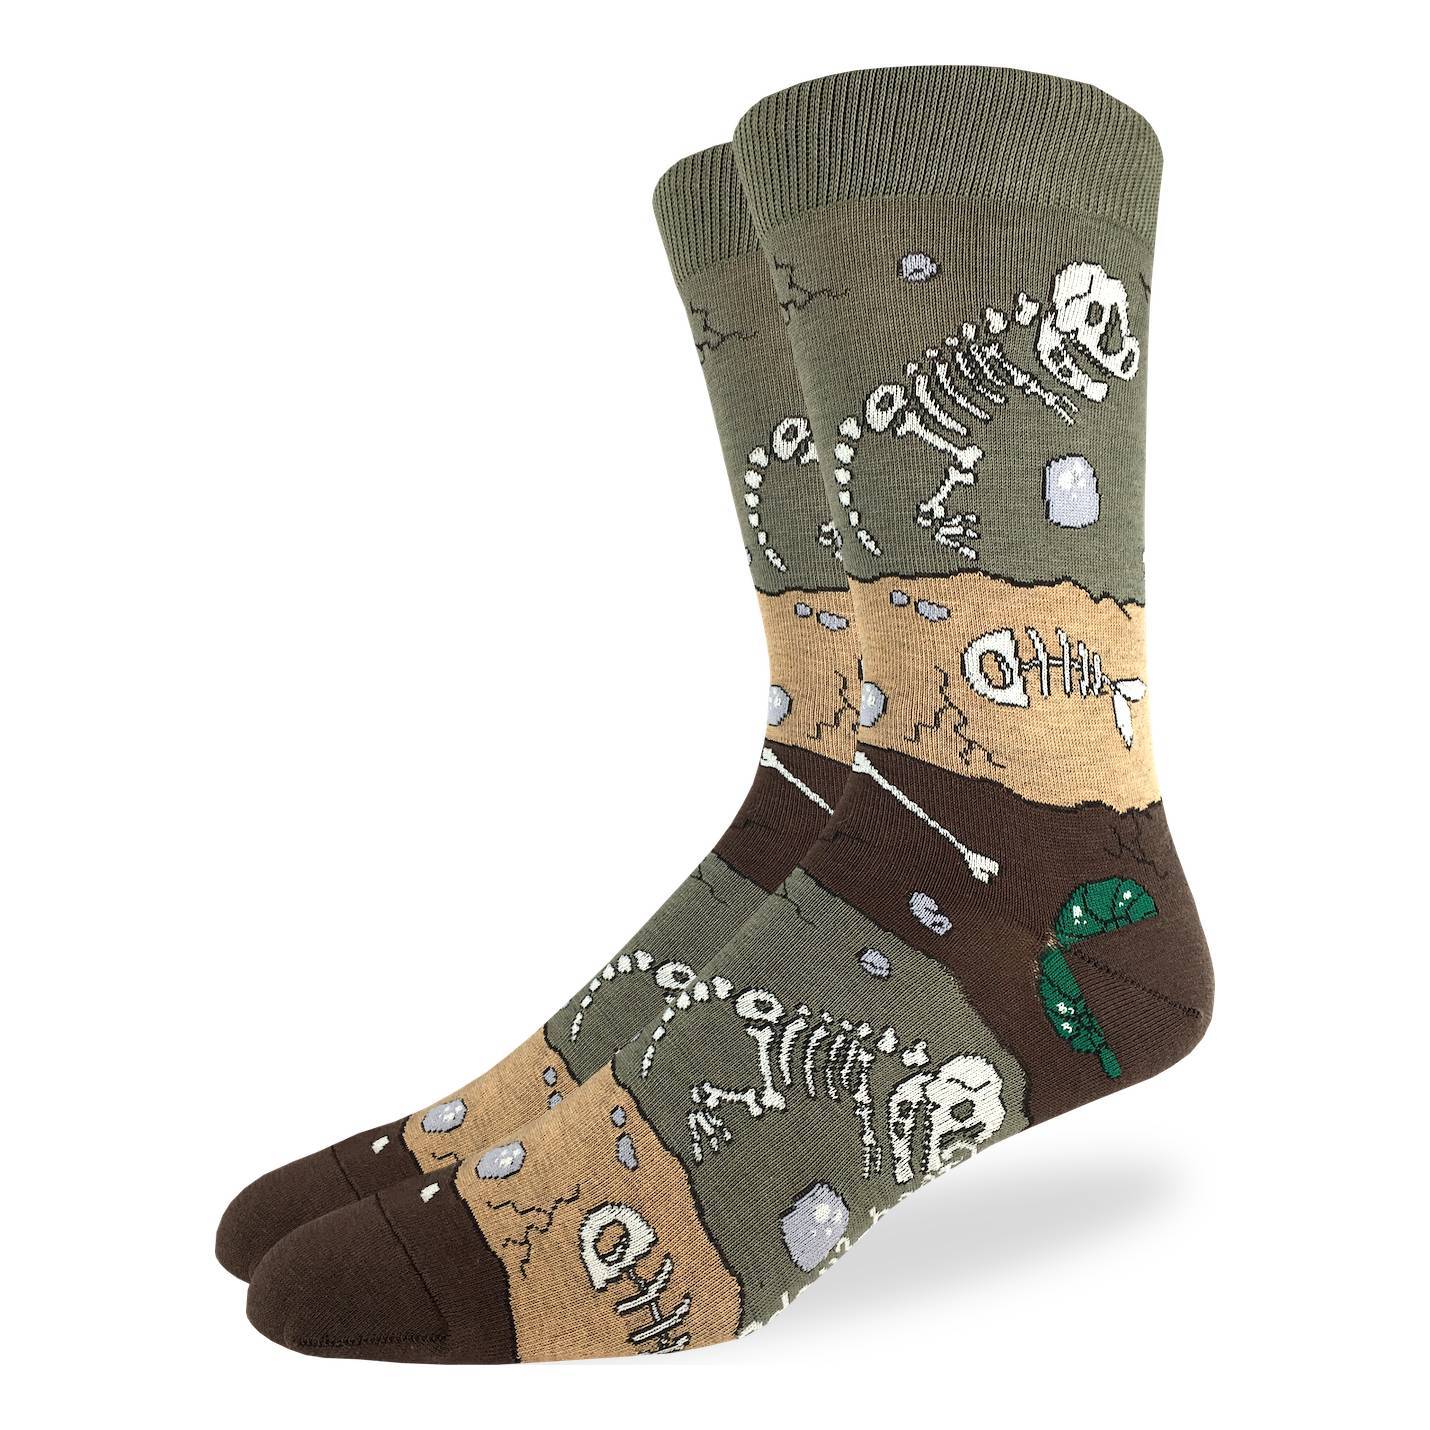 Fossil layer socks size 13-17